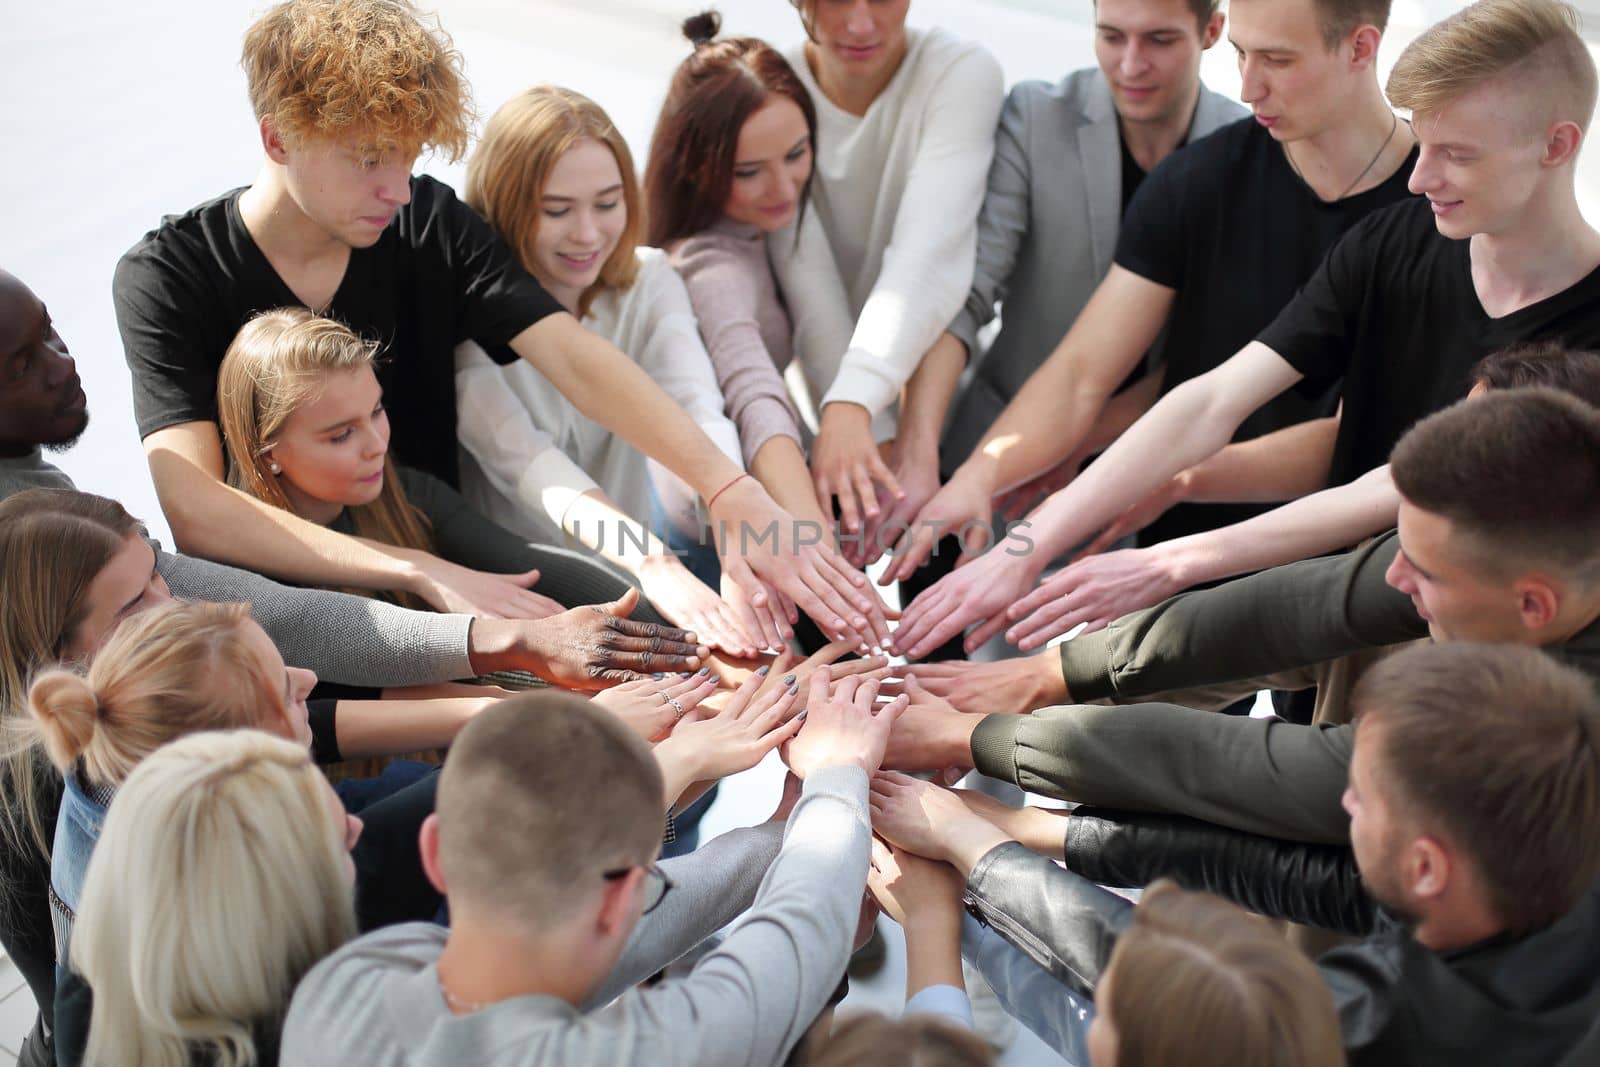 close up. a group of diverse people joining their hands in a circle.